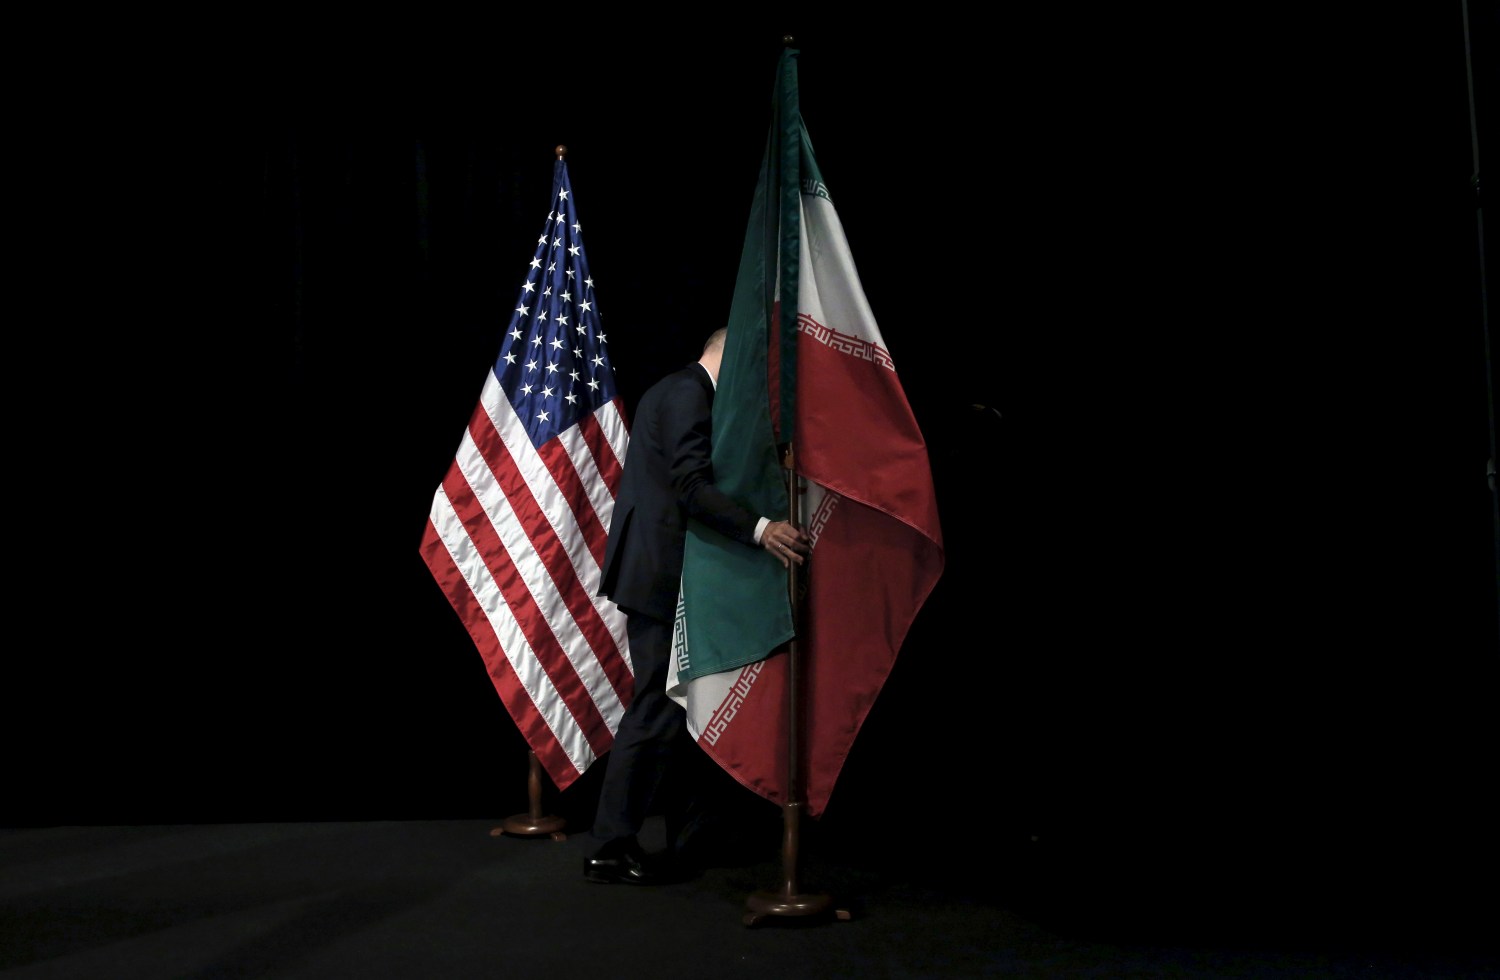 A staff removes the Iranian flag from the stage after a group picture with foreign ministers and representatives during the Iran nuclear talks at the Vienna International Center in Vienna